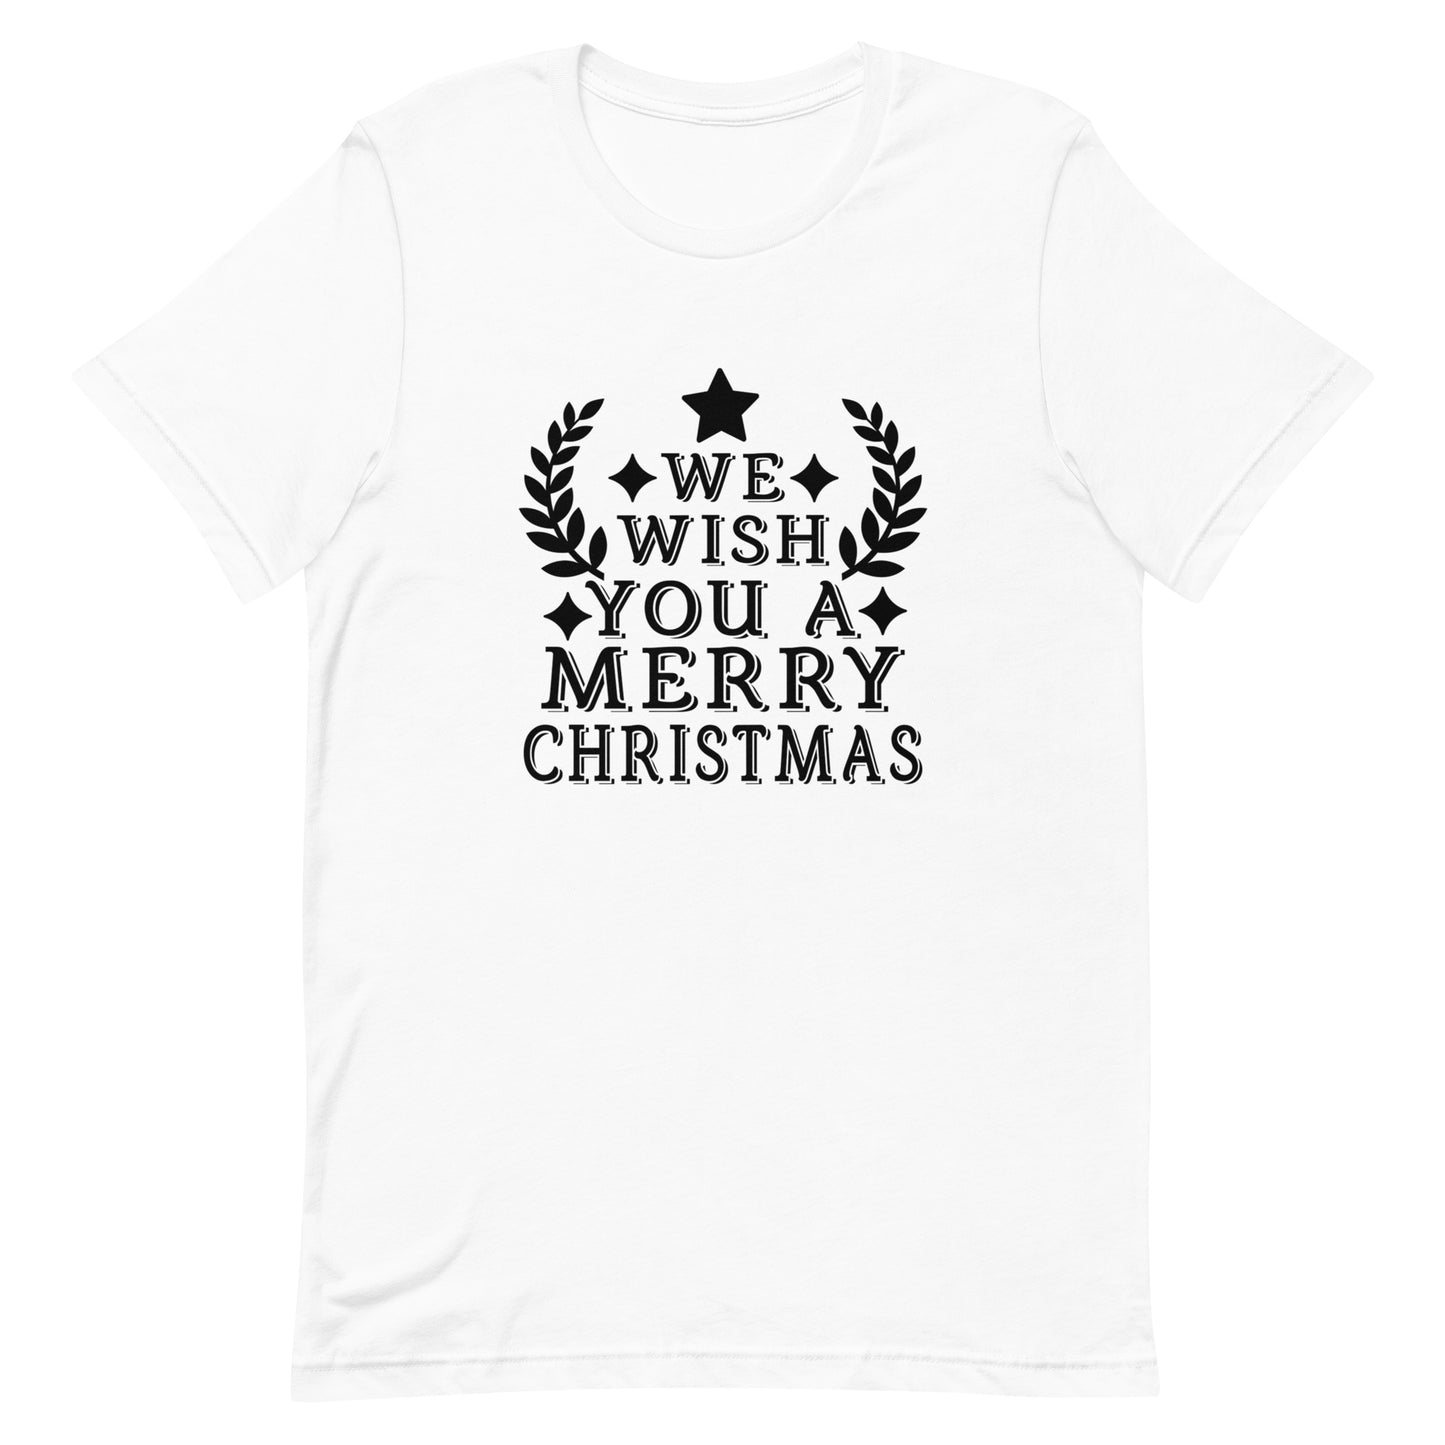 We Wish You a Merry Christmas Unisex t-shirt